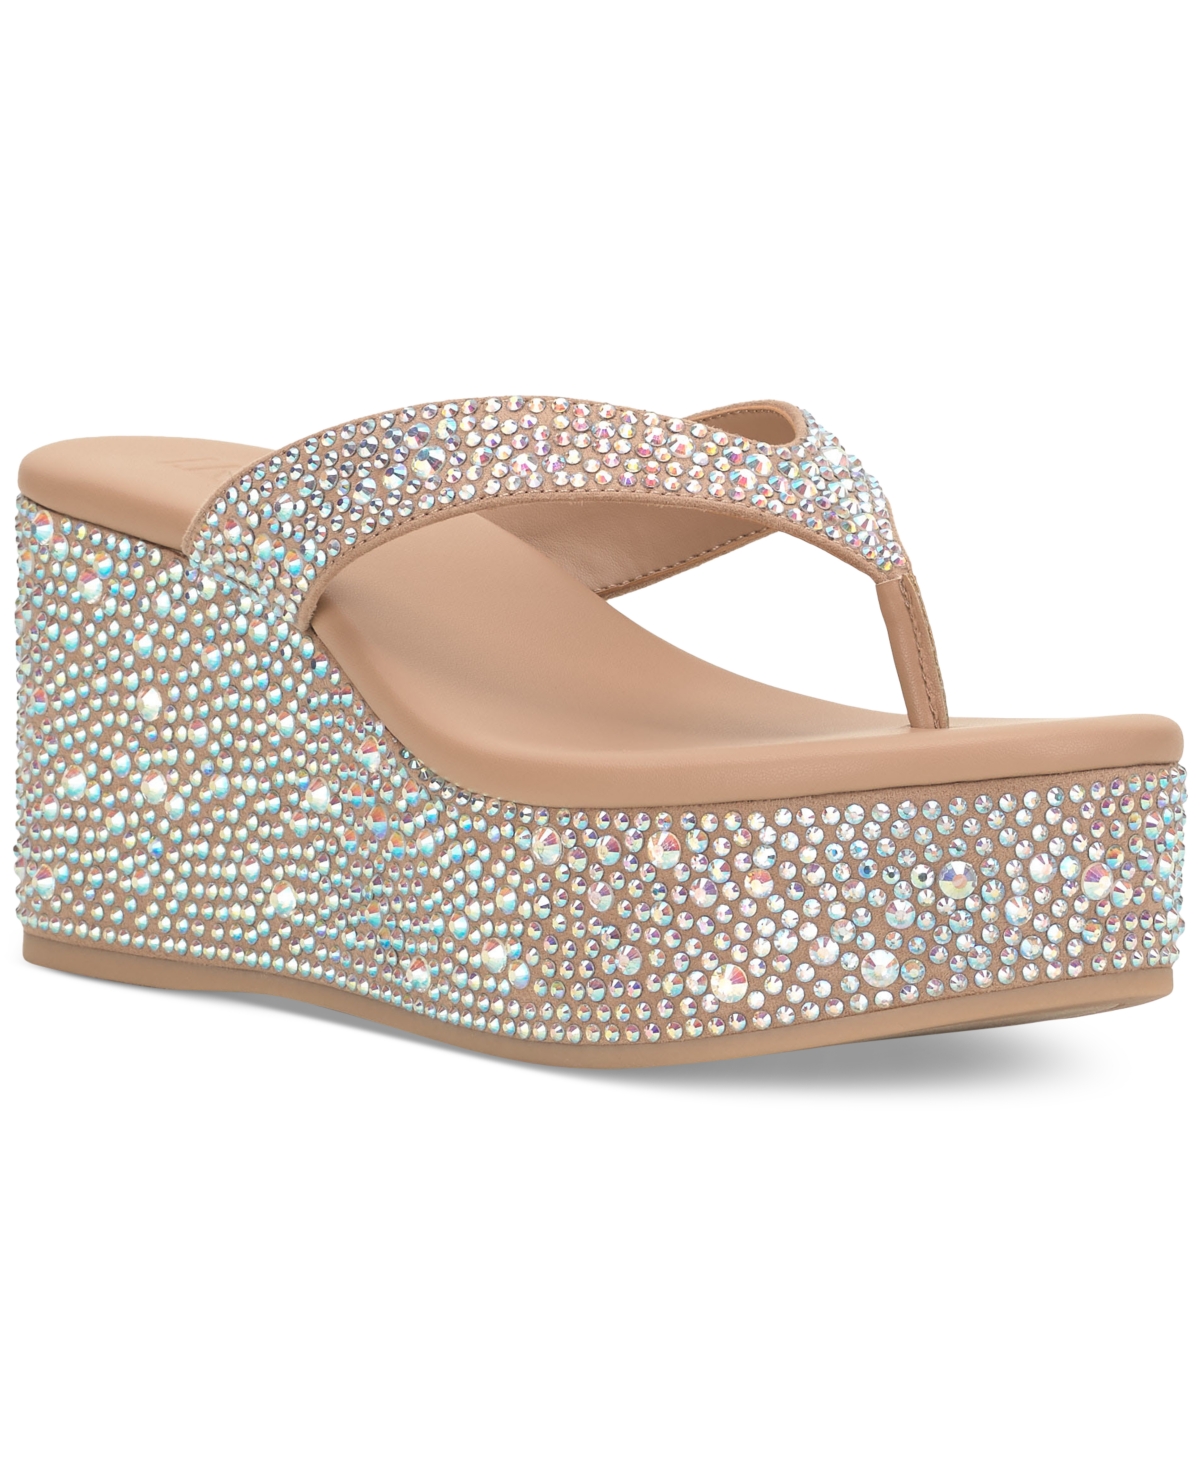 Women's Loli Wedge Sandals, Created for Macy's - Ab Bling